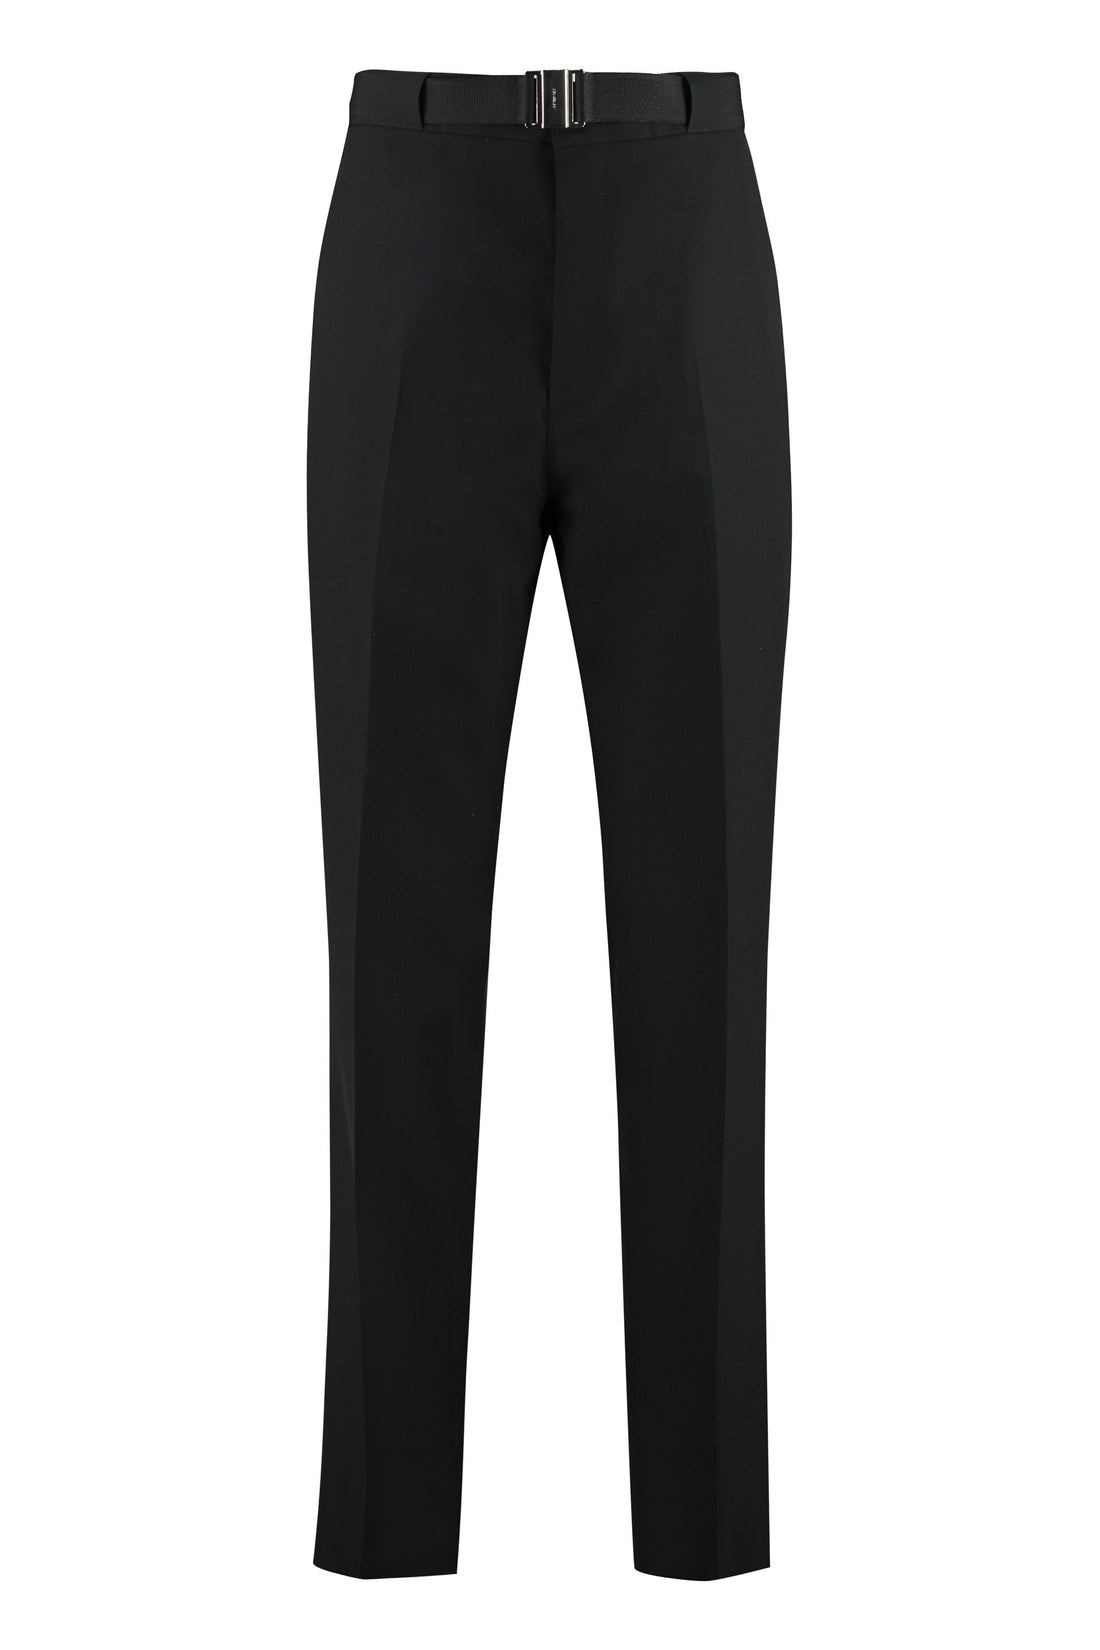 Givenchy-OUTLET-SALE-Virgin wool trousers-ARCHIVIST